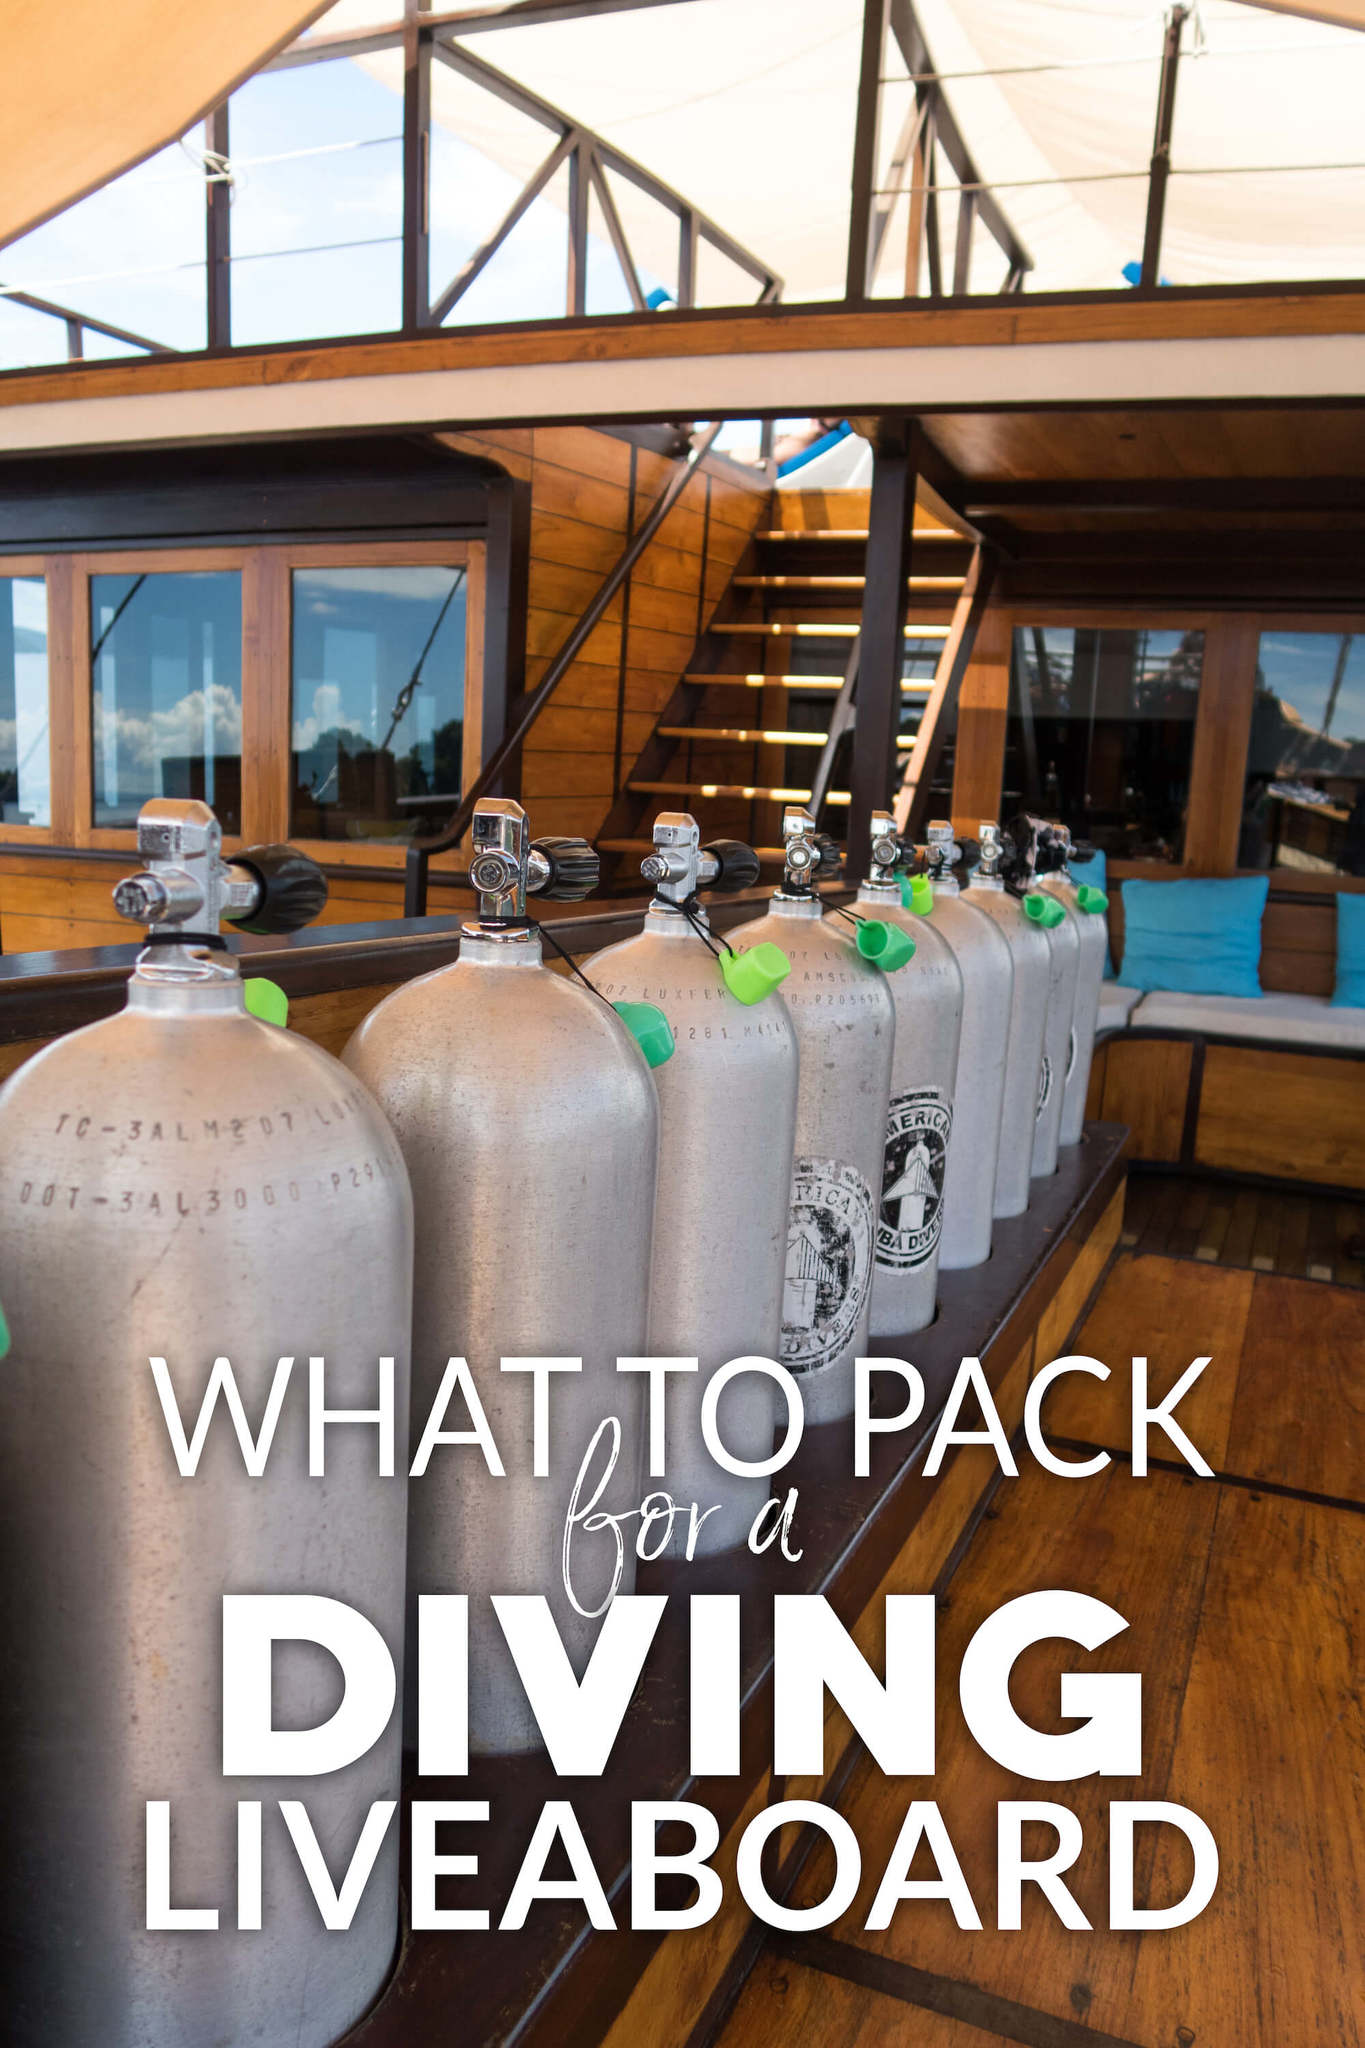 What to Pack for a Diving Liveaboard